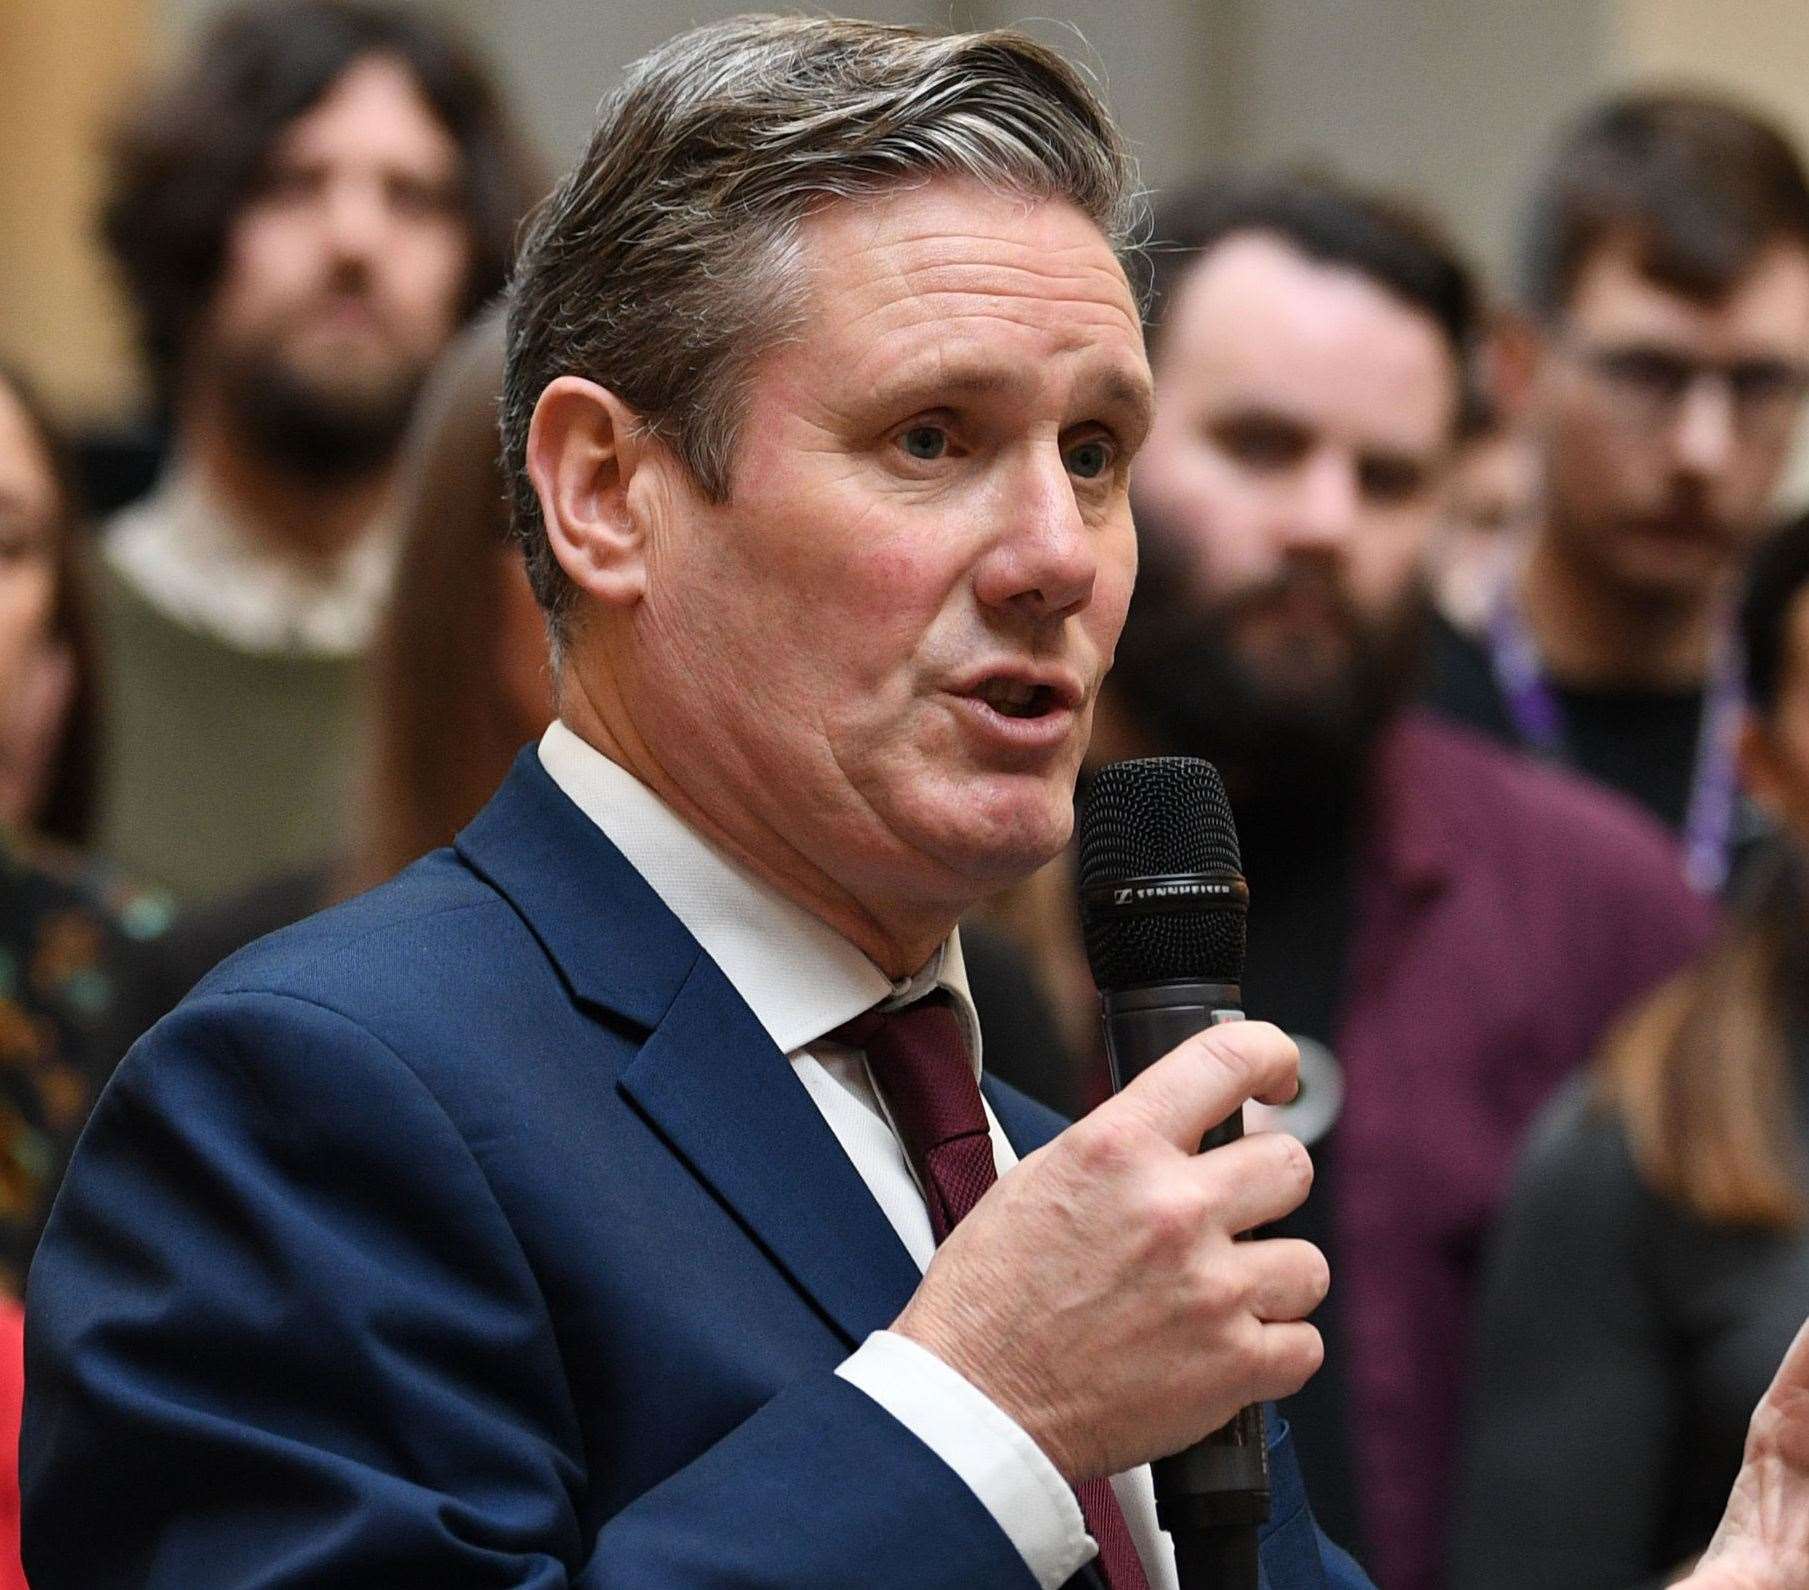 Labour leader Sir Keir Starmer has joined the fight to save hundreds of jobs threatened at Chatham Docks. Picture: Stefan Rousseau/PA Wire